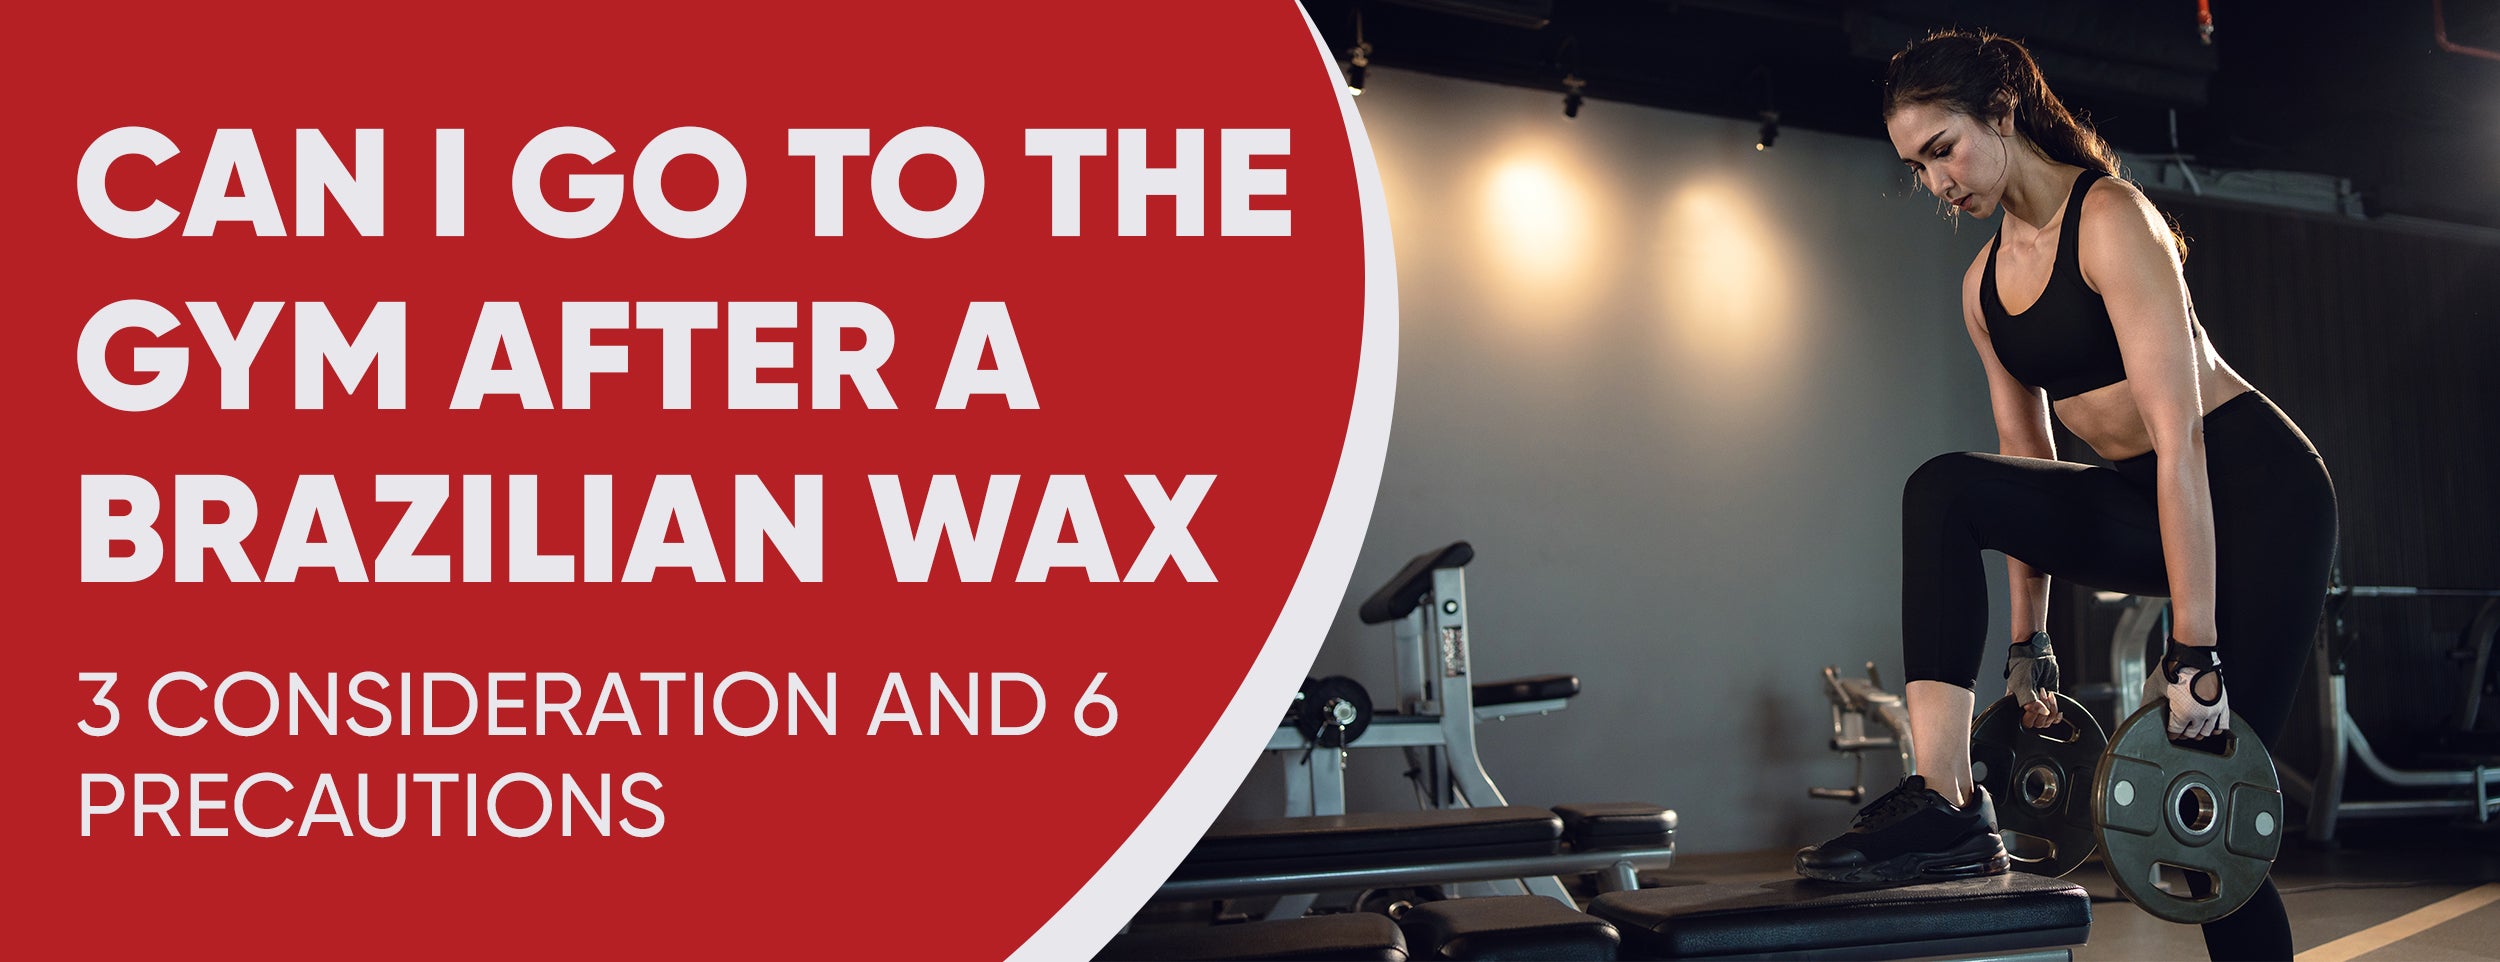 Is It Safe To Go To The Gym After A Brazilian Wax? 3 Factors & 6 Precautions